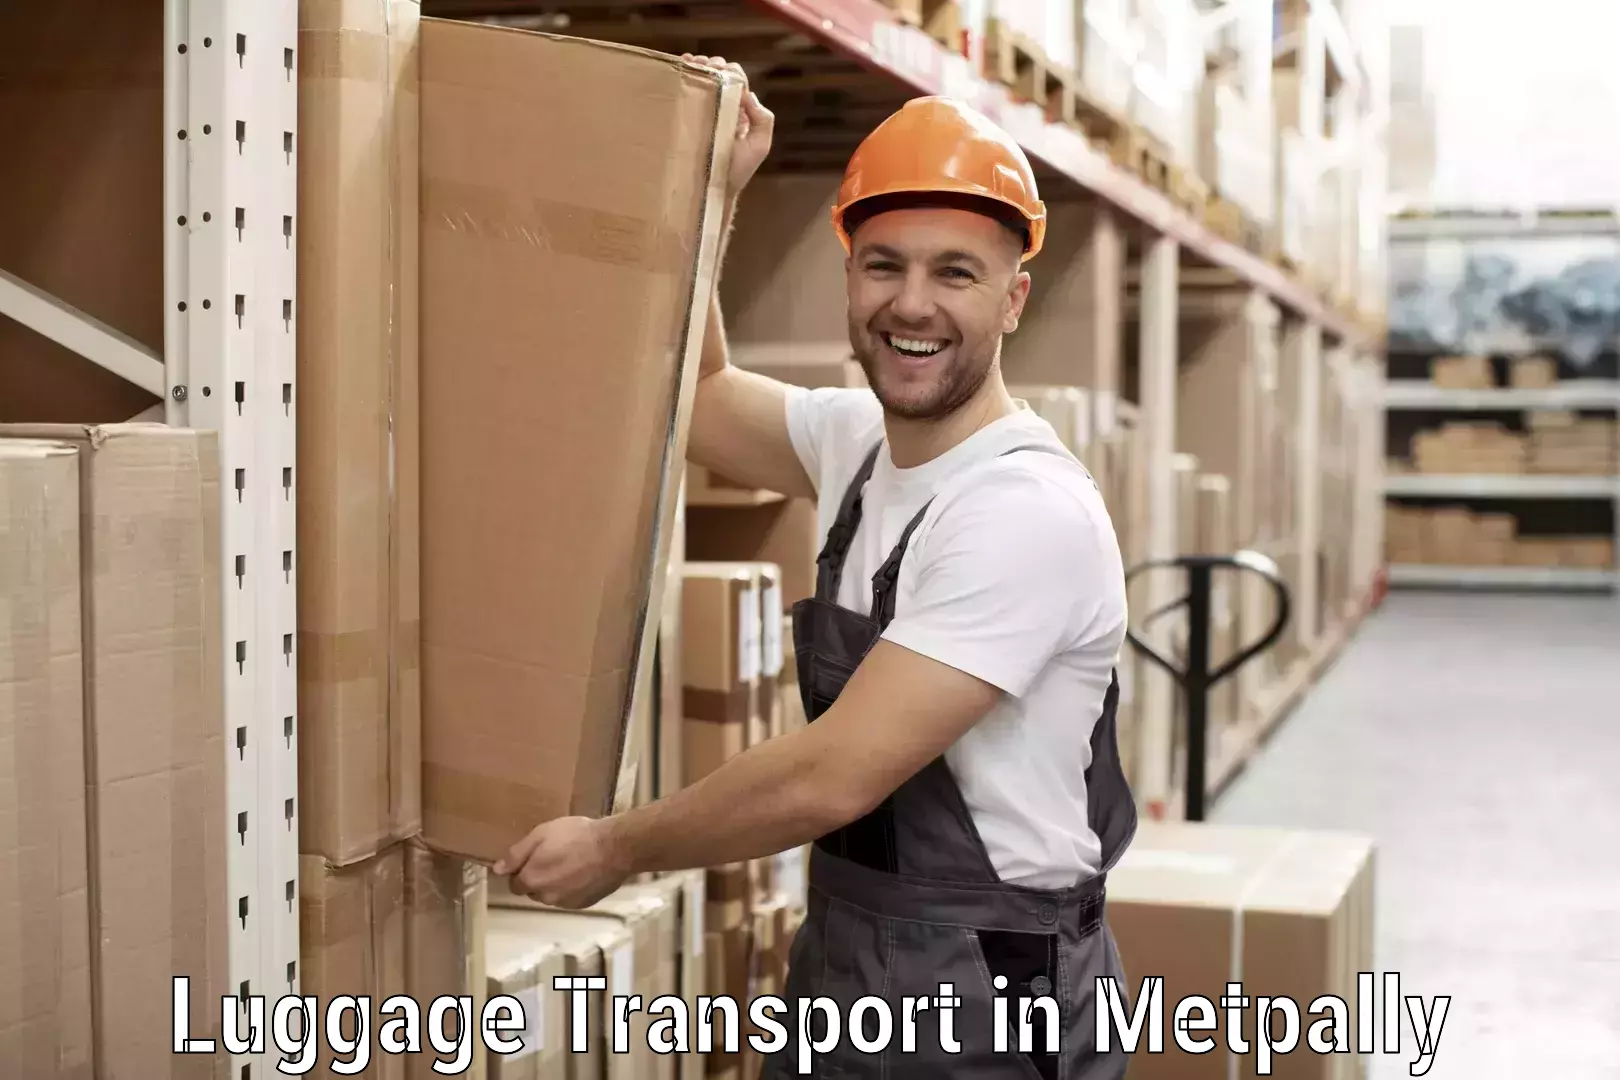 Business luggage transport in Metpally